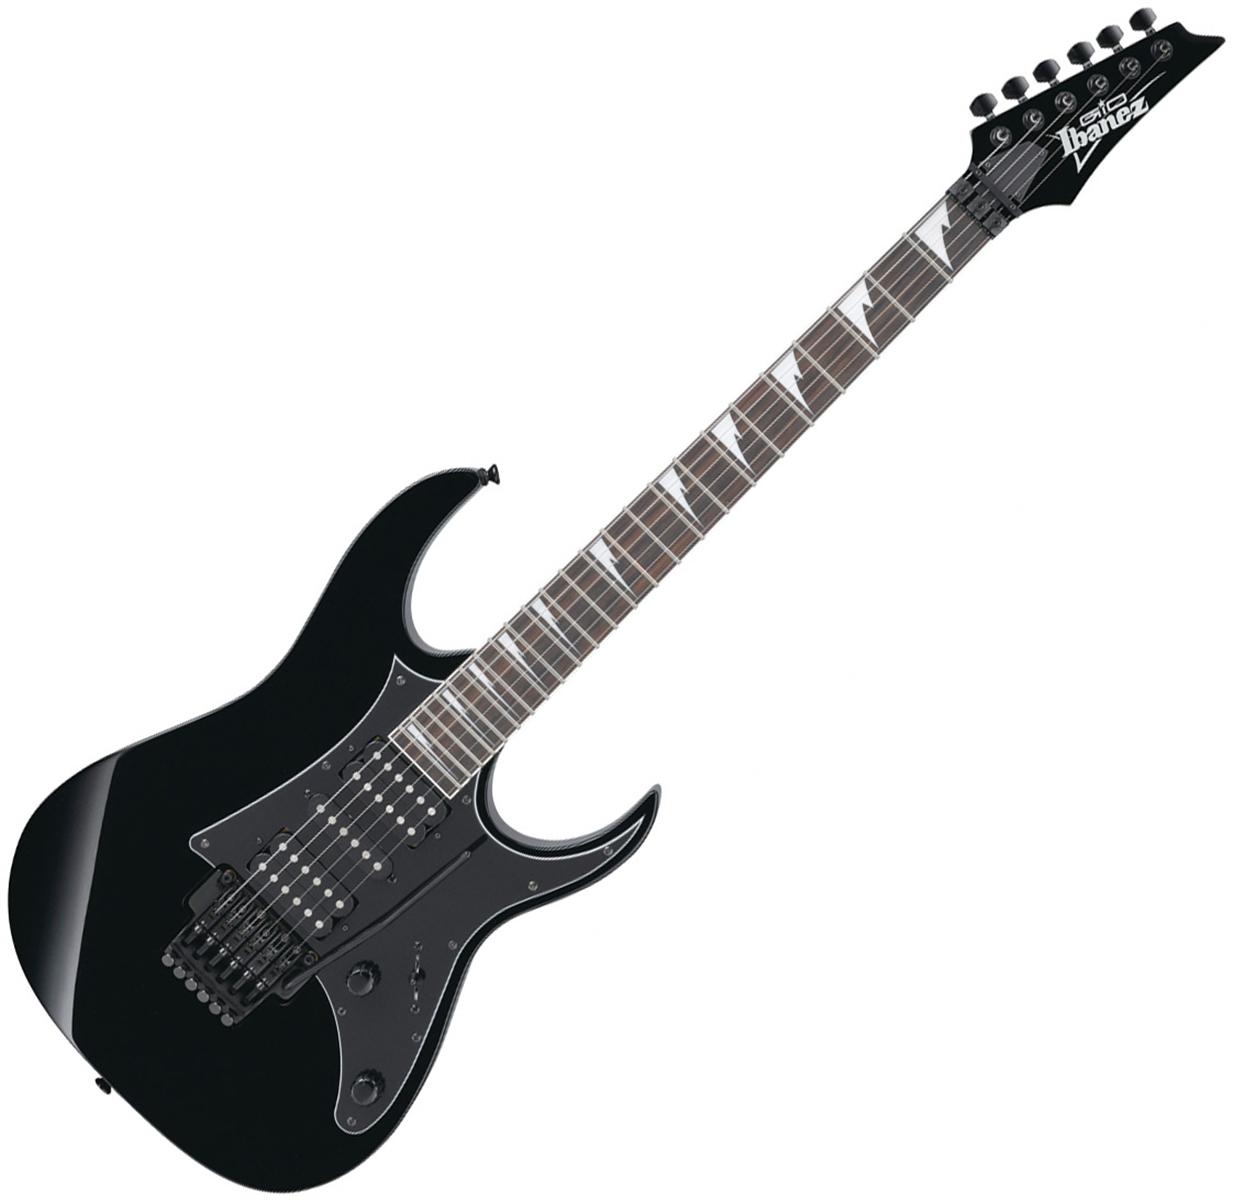 Electric guitar clipart black and white